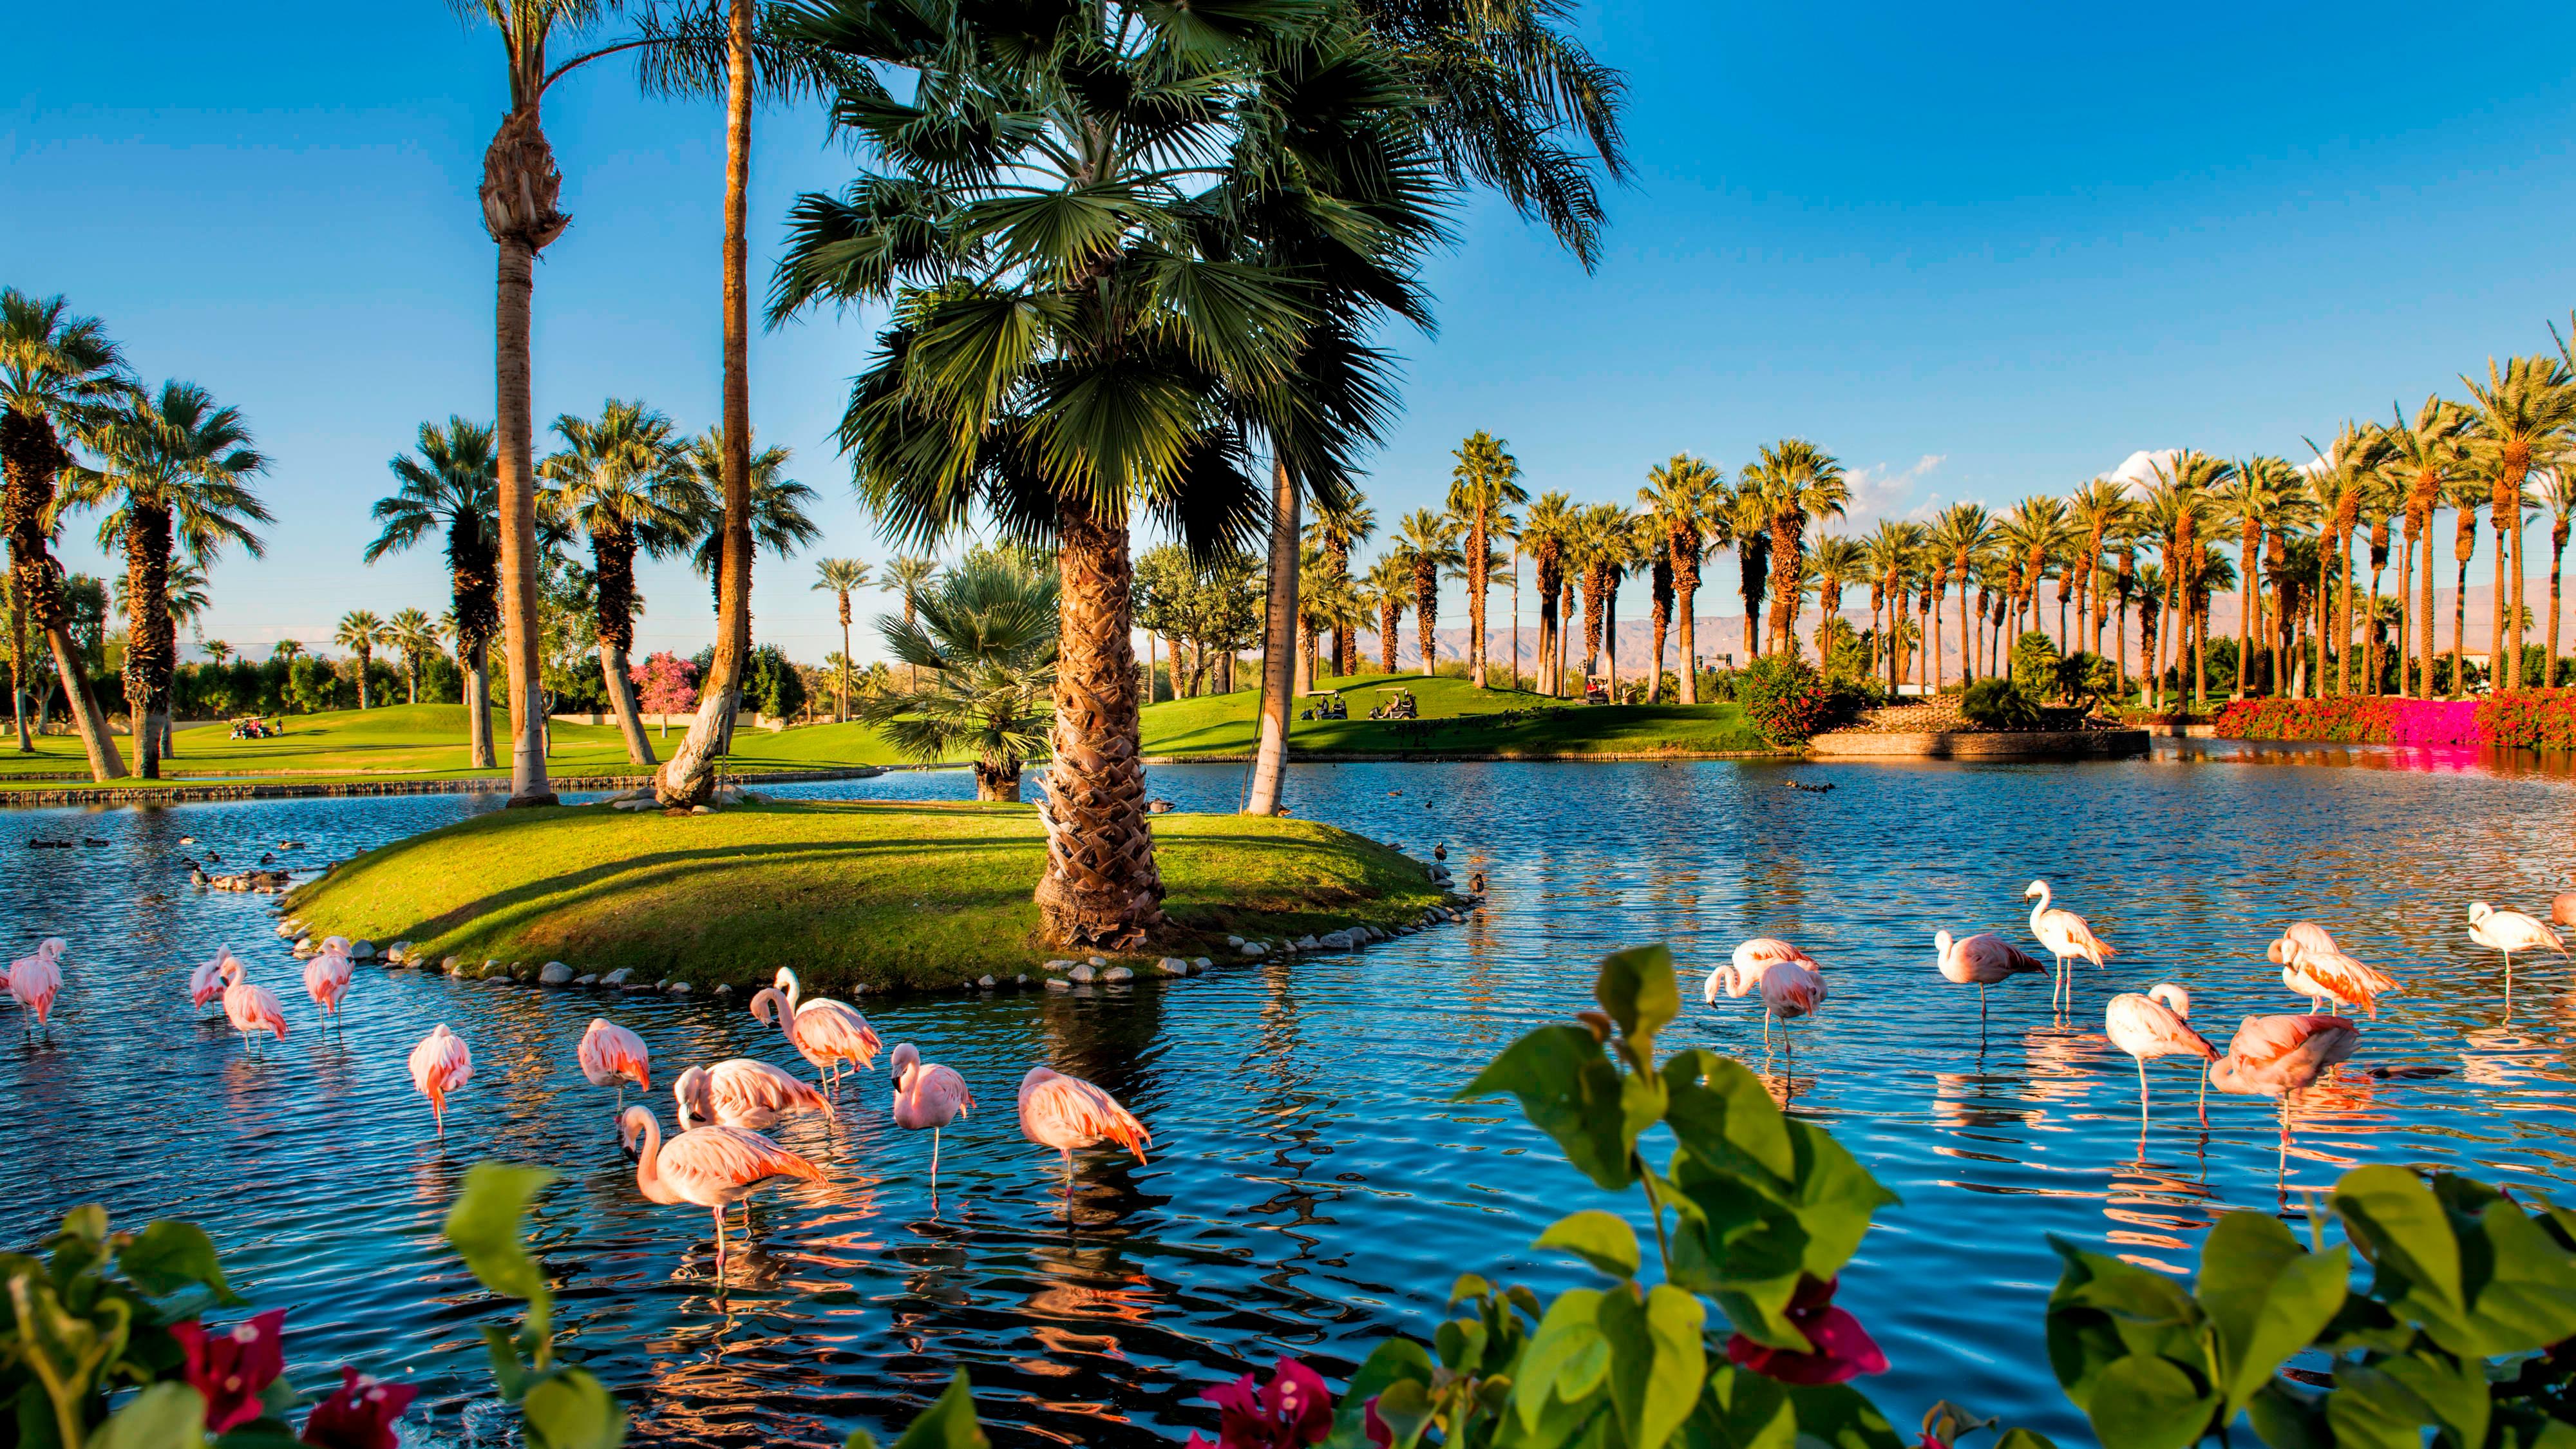 Pink flamingos on water surrounded by palm trees